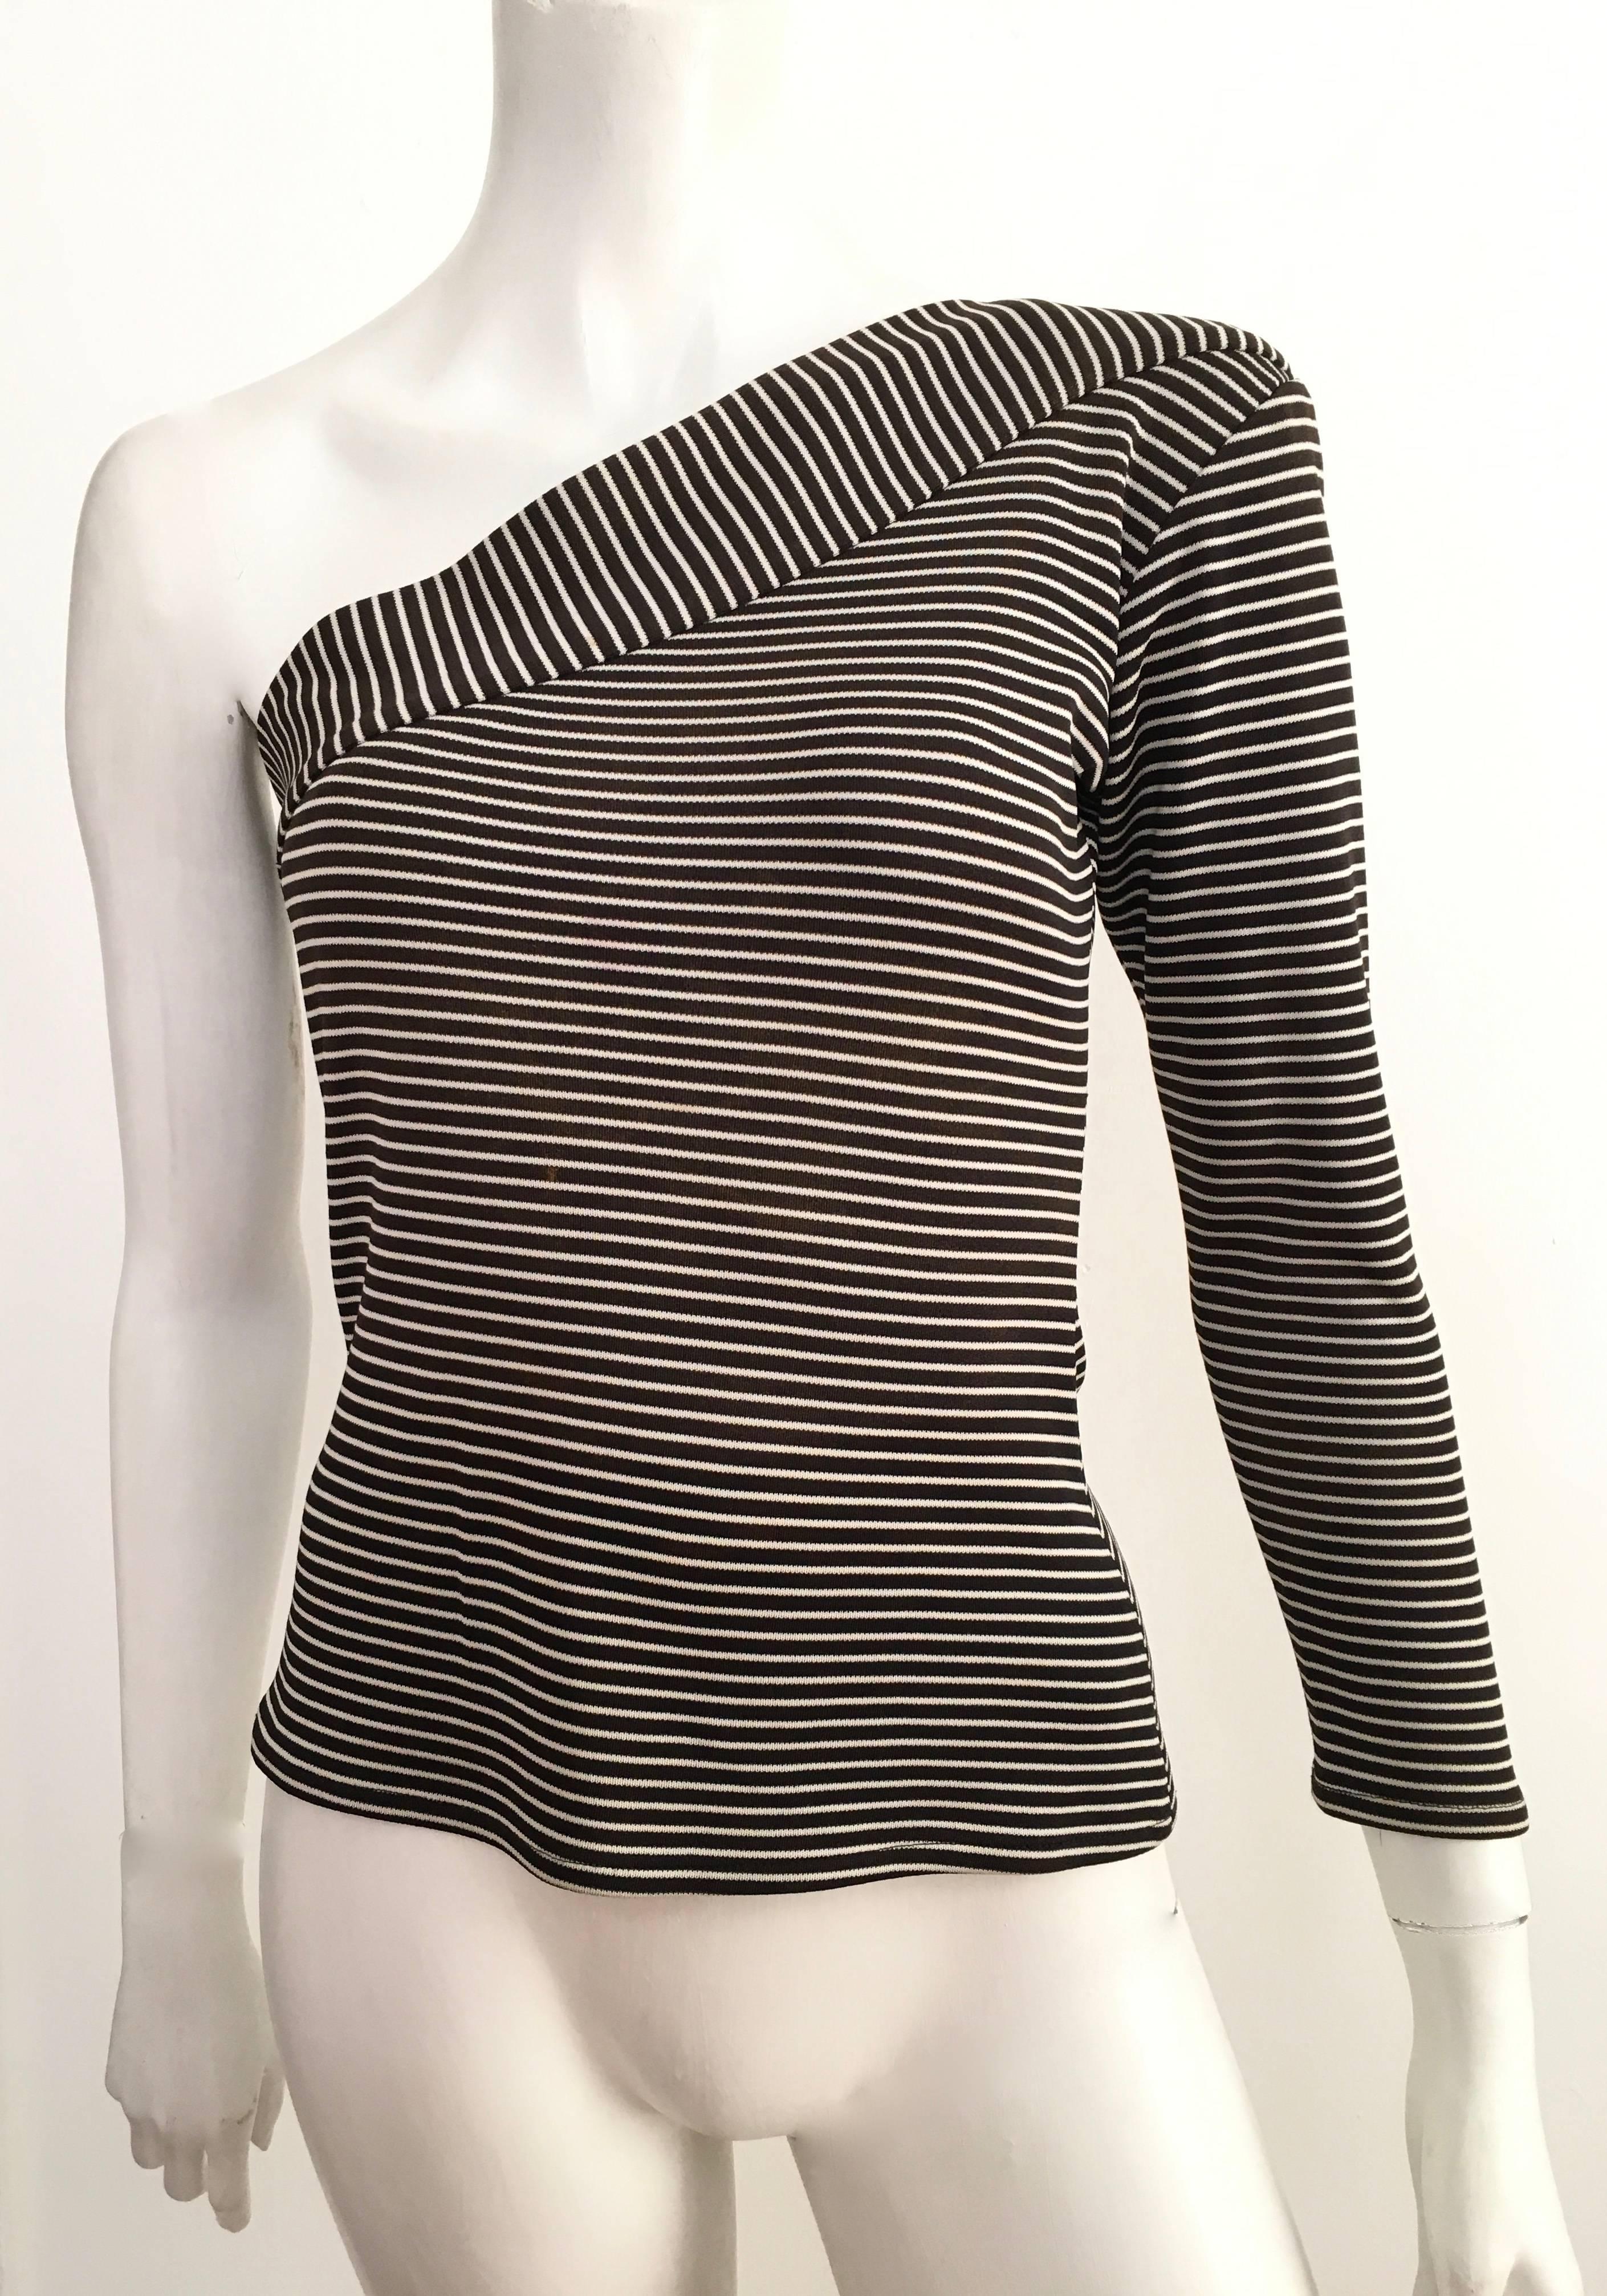 Saint Laurent by Yves Saint Laurent 1980s black & white striped knit one should long sleeve top is a size 4.  Ladies please grab your trusted tape measure so you can properly measure your bust line and sleeves to make certain this will fit your